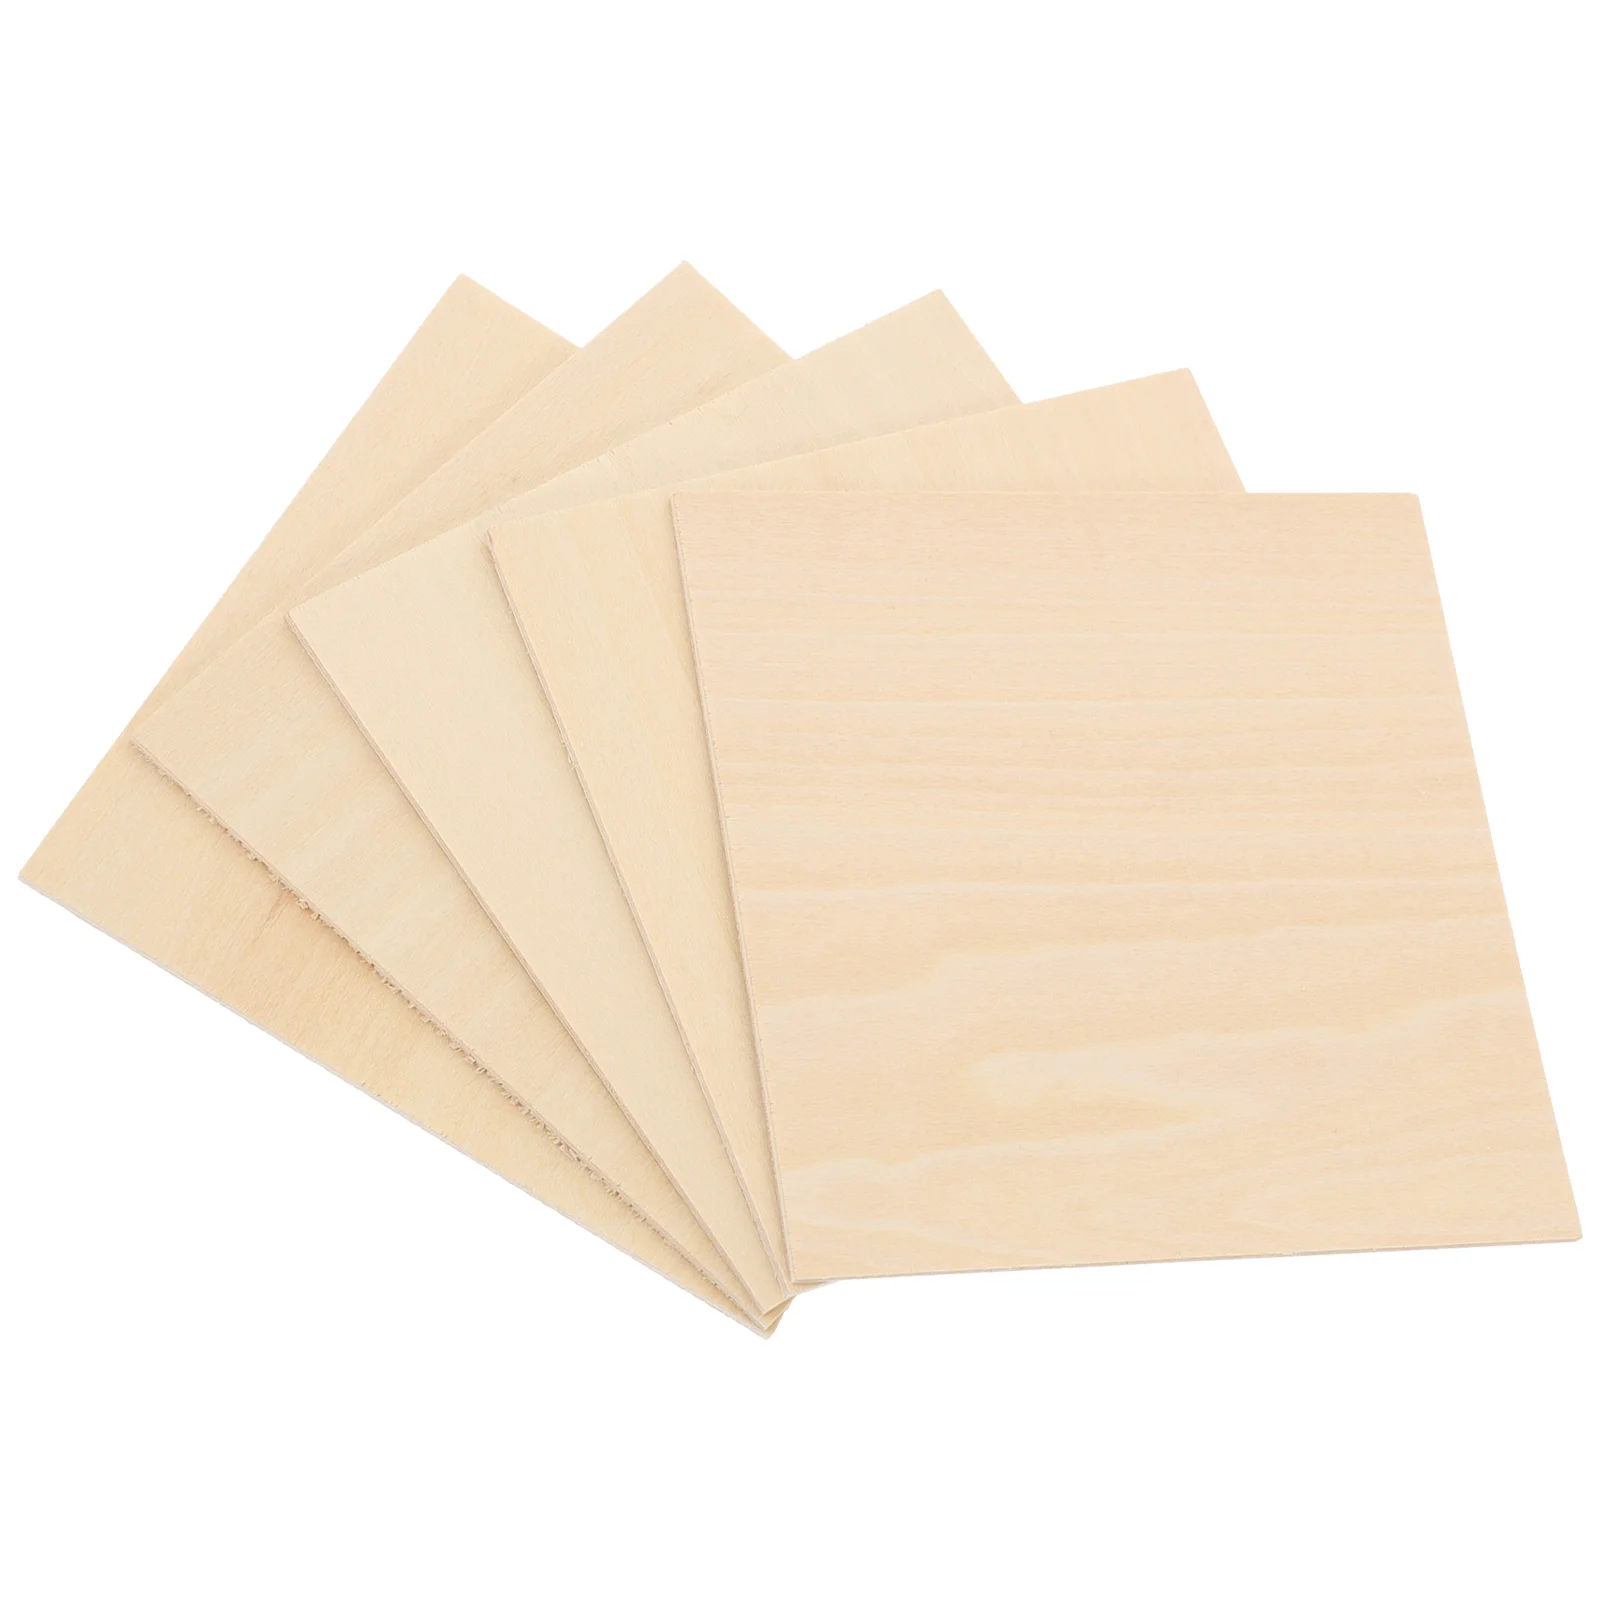 

Wood Diy Wooden Unfinished Sheets Planks Craft Decorcut Hardwood Slices Boards Materials Model Architecture Plain Panel Slice